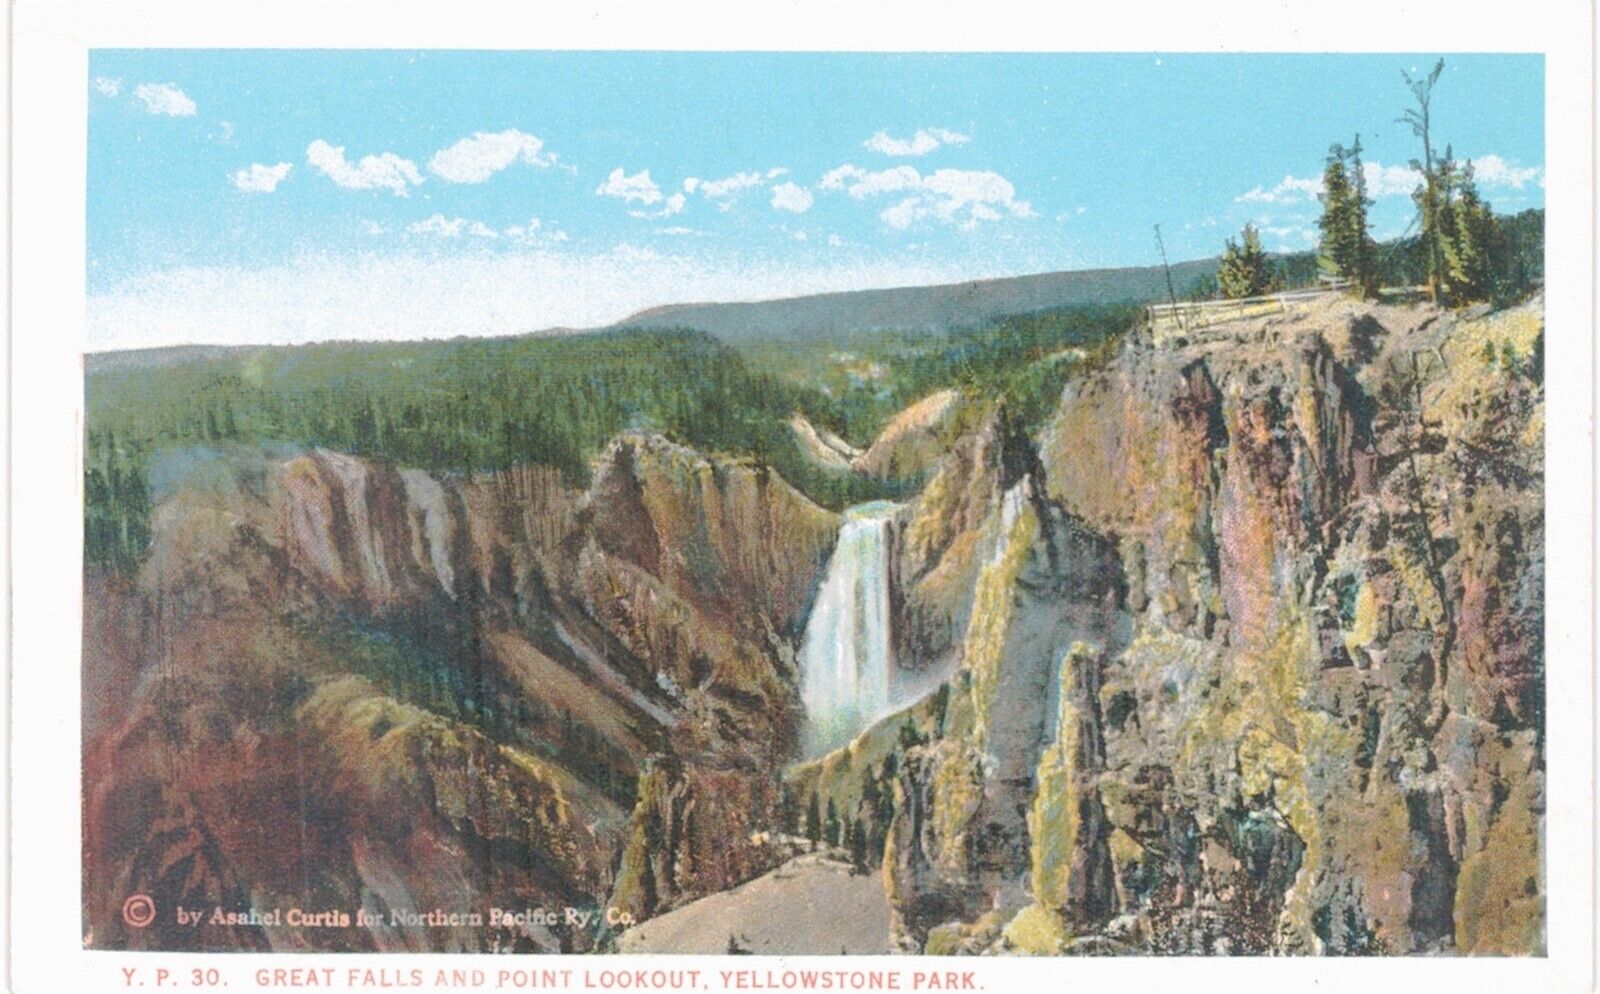 Yellowstone Great Falls Point Lookout Asahel Curtis NP Railroad Bloom Bros 1910 